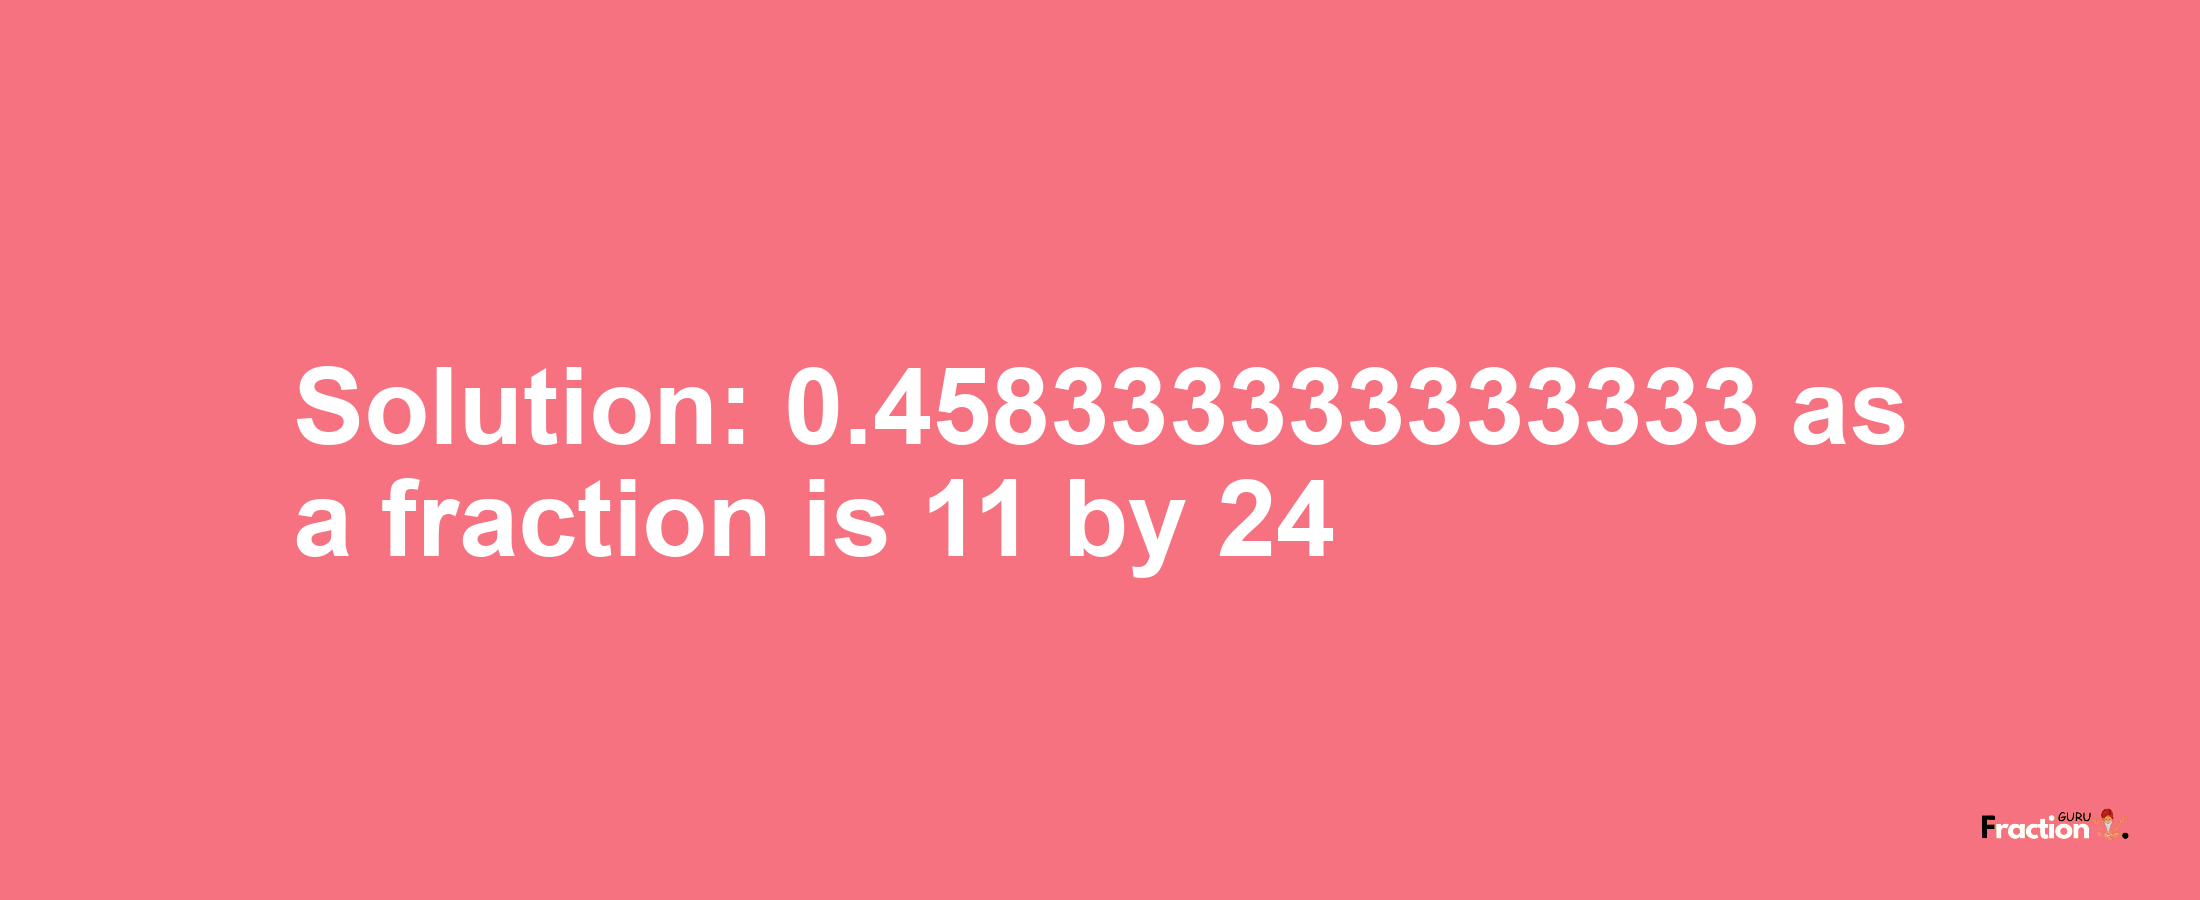 Solution:0.458333333333333 as a fraction is 11/24